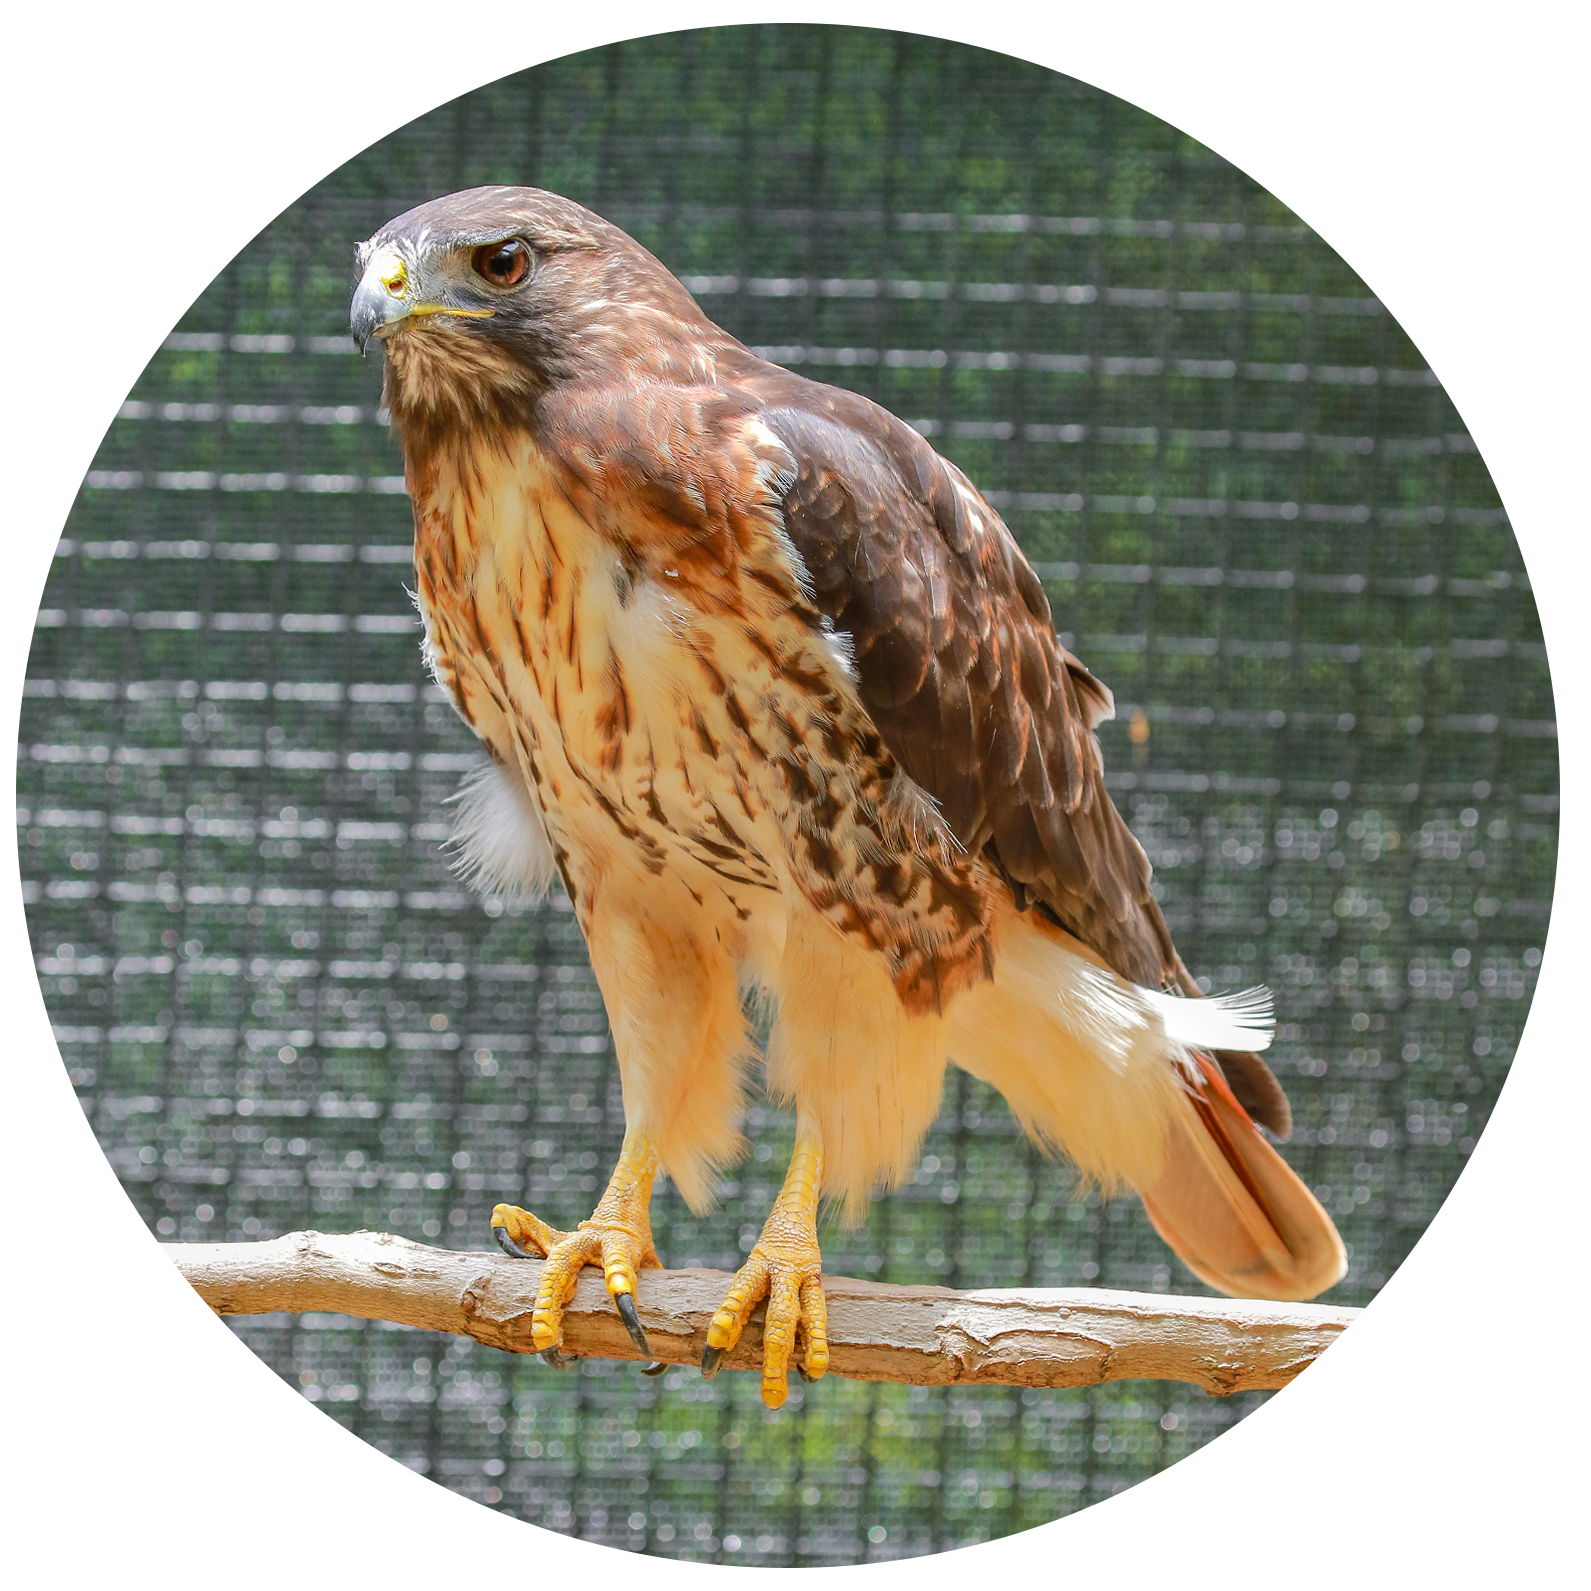 Zihna, male red-tailed hawk.